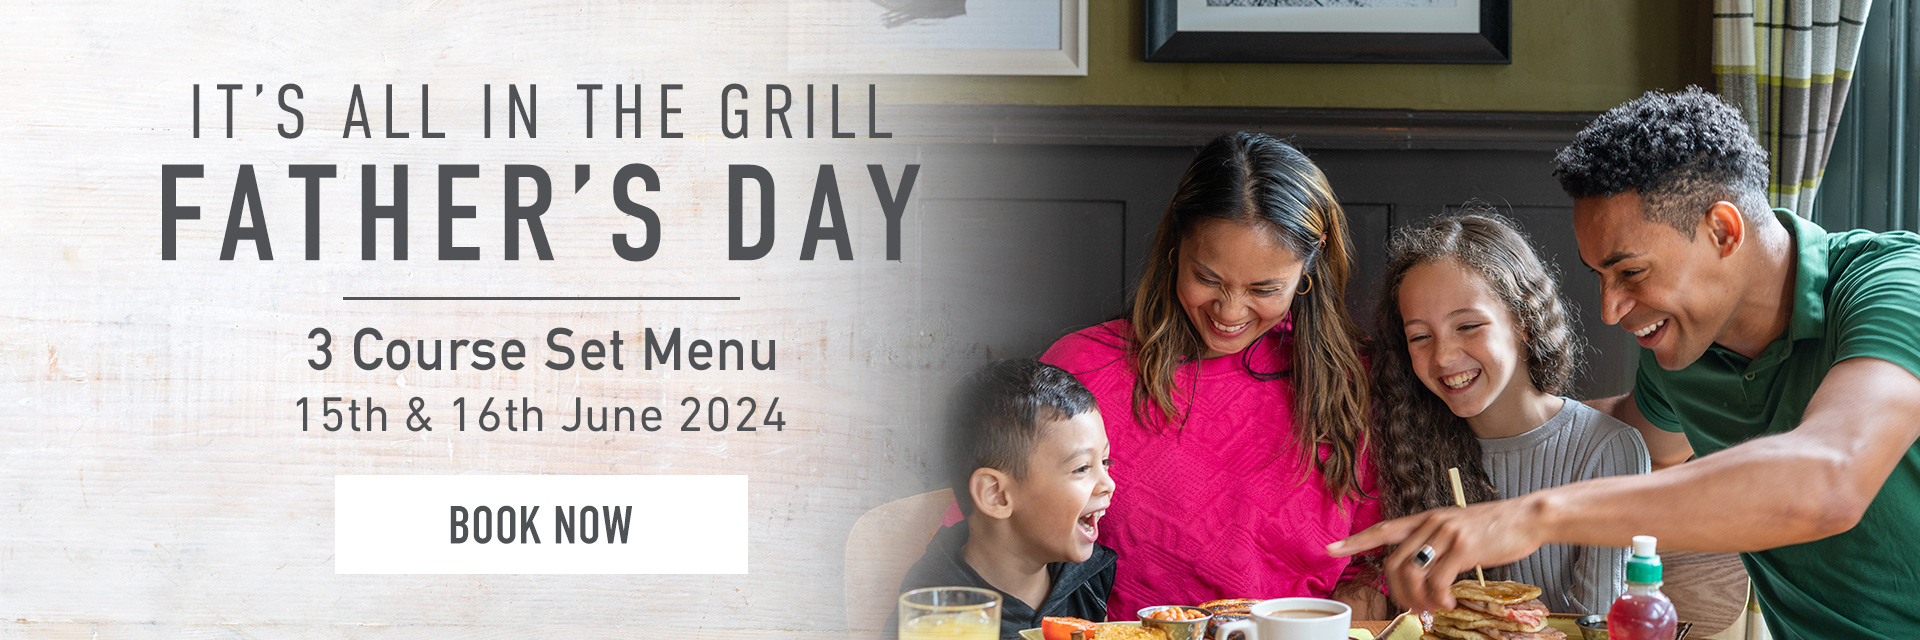 Father’s Day Menu 2024 at Your Local Harvester